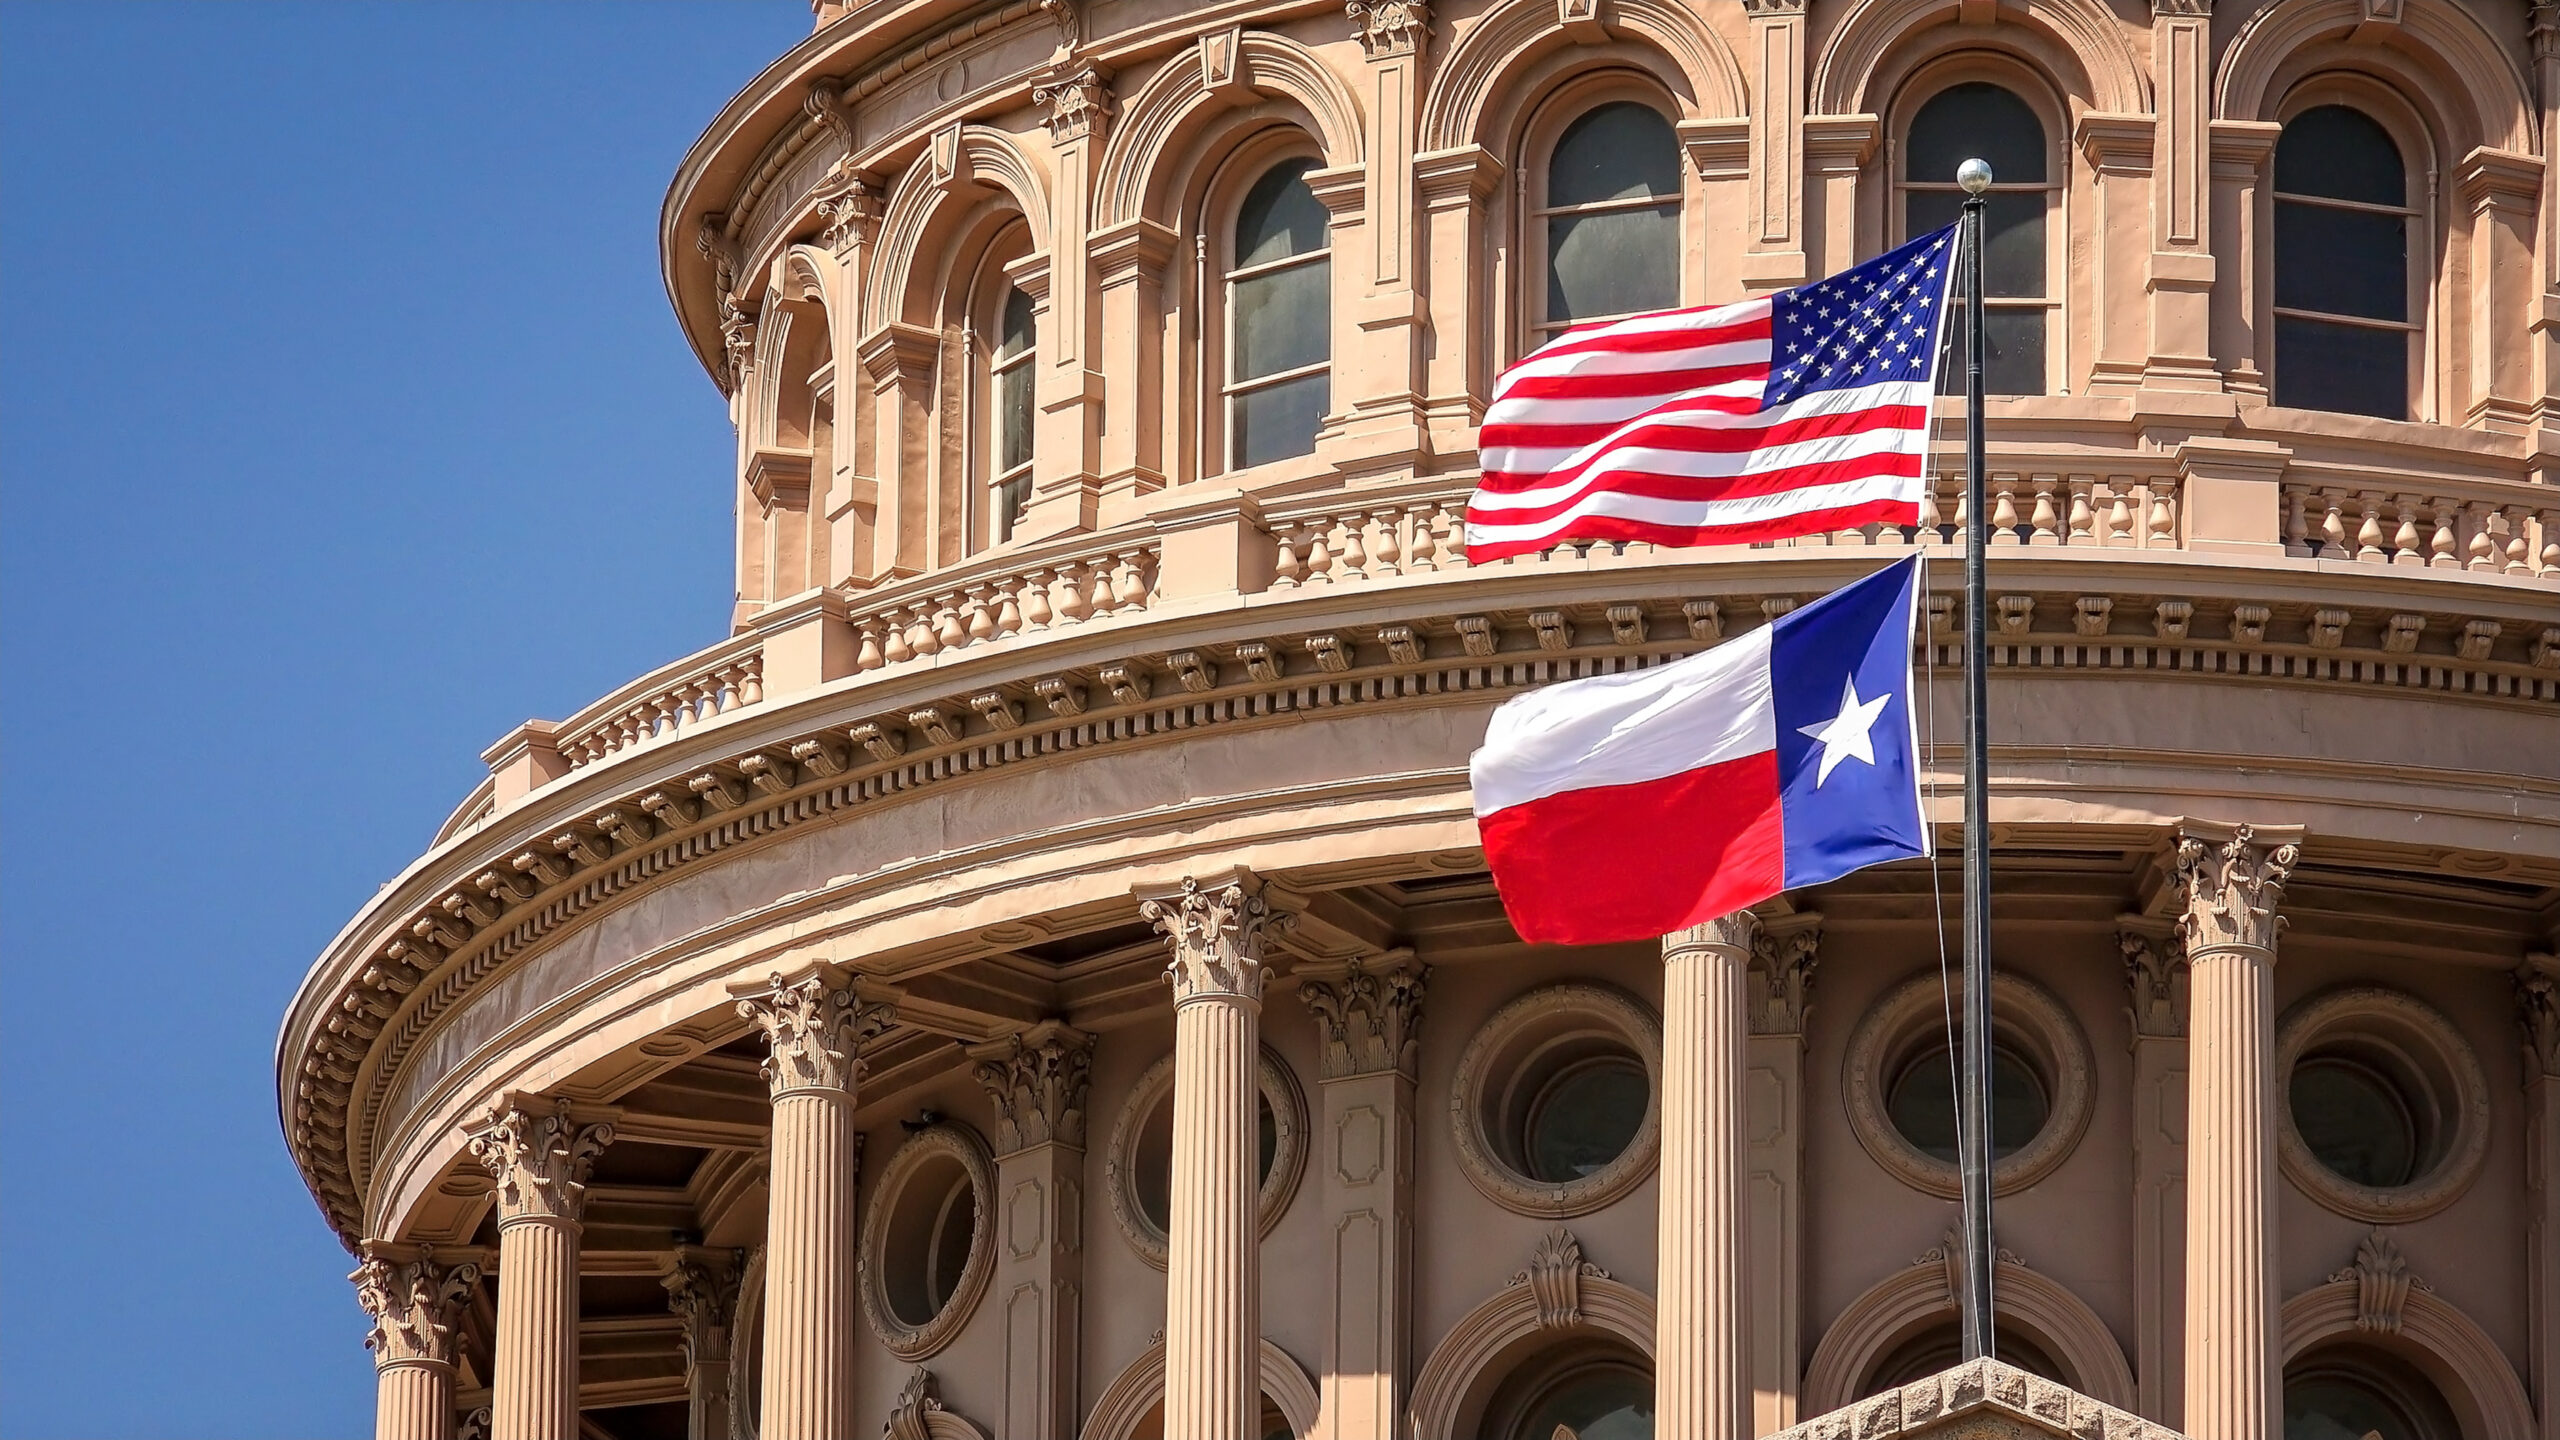 Testimony: Texas Pensions Would Benefit from Increased Transparency